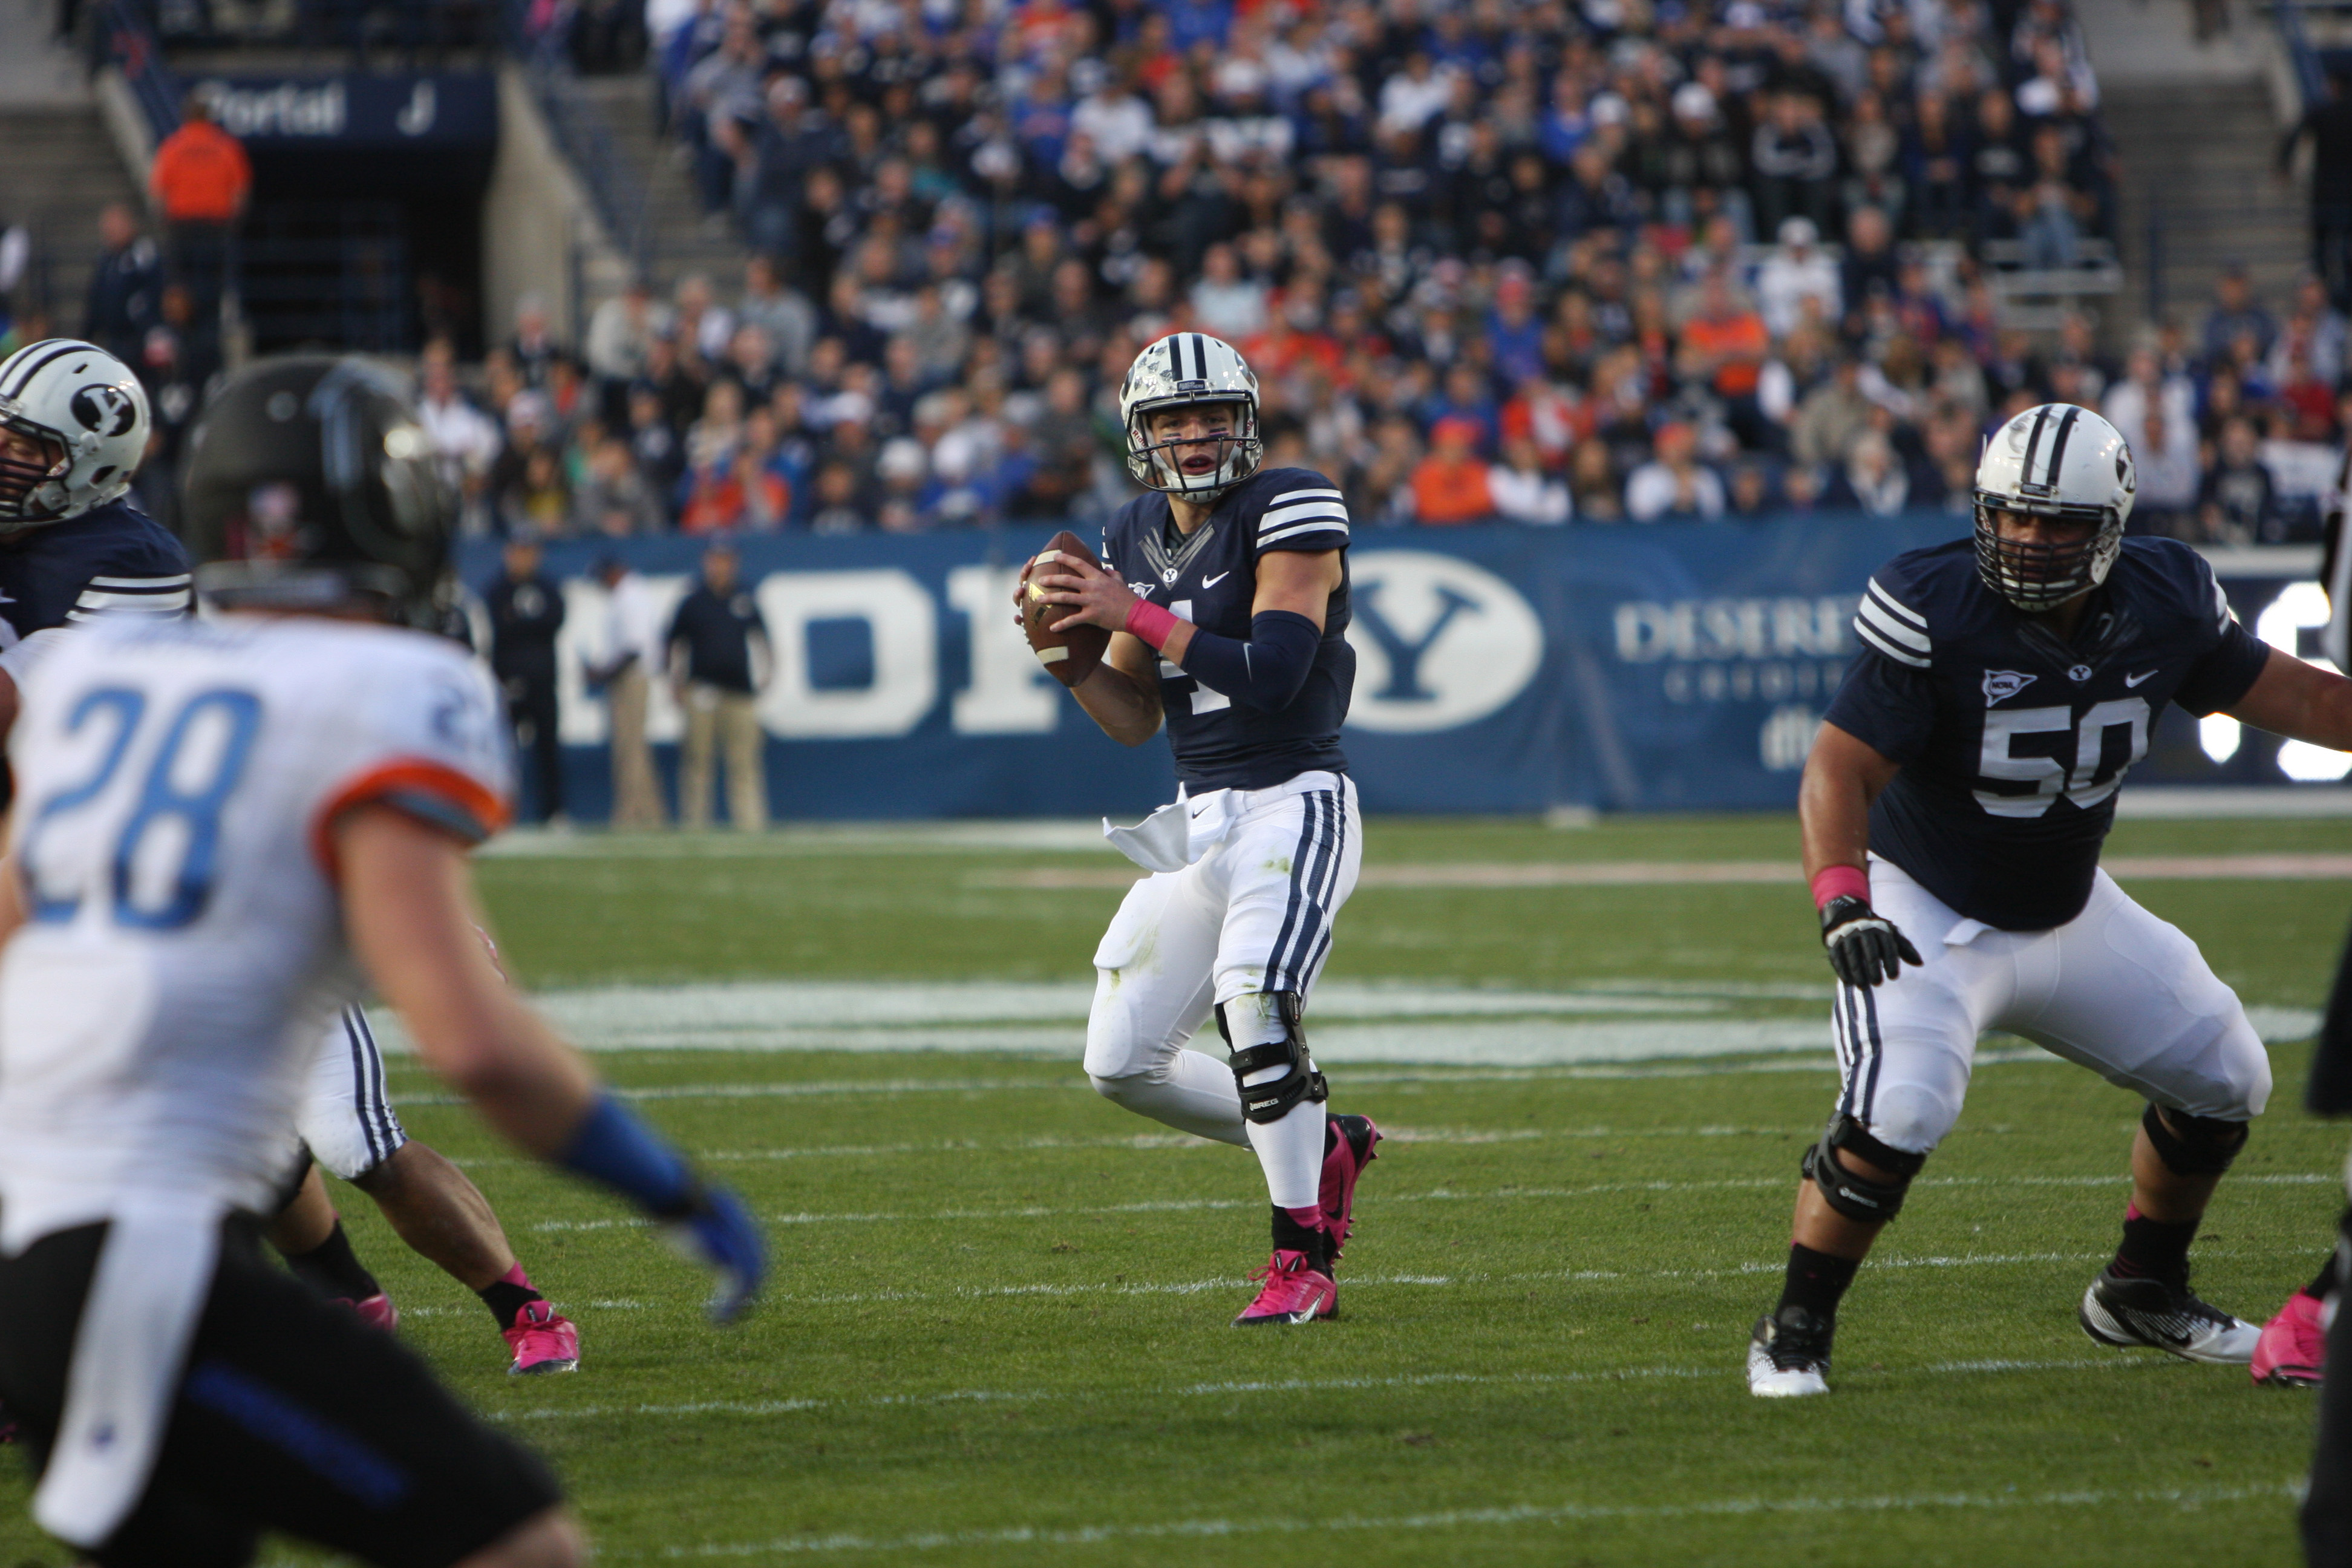 Taysom Hill looks down field for an open receiver against Boise State last season. The Cougars will travel to Boise to face the Broncos on Oct. 24. (Natalie Stoker)